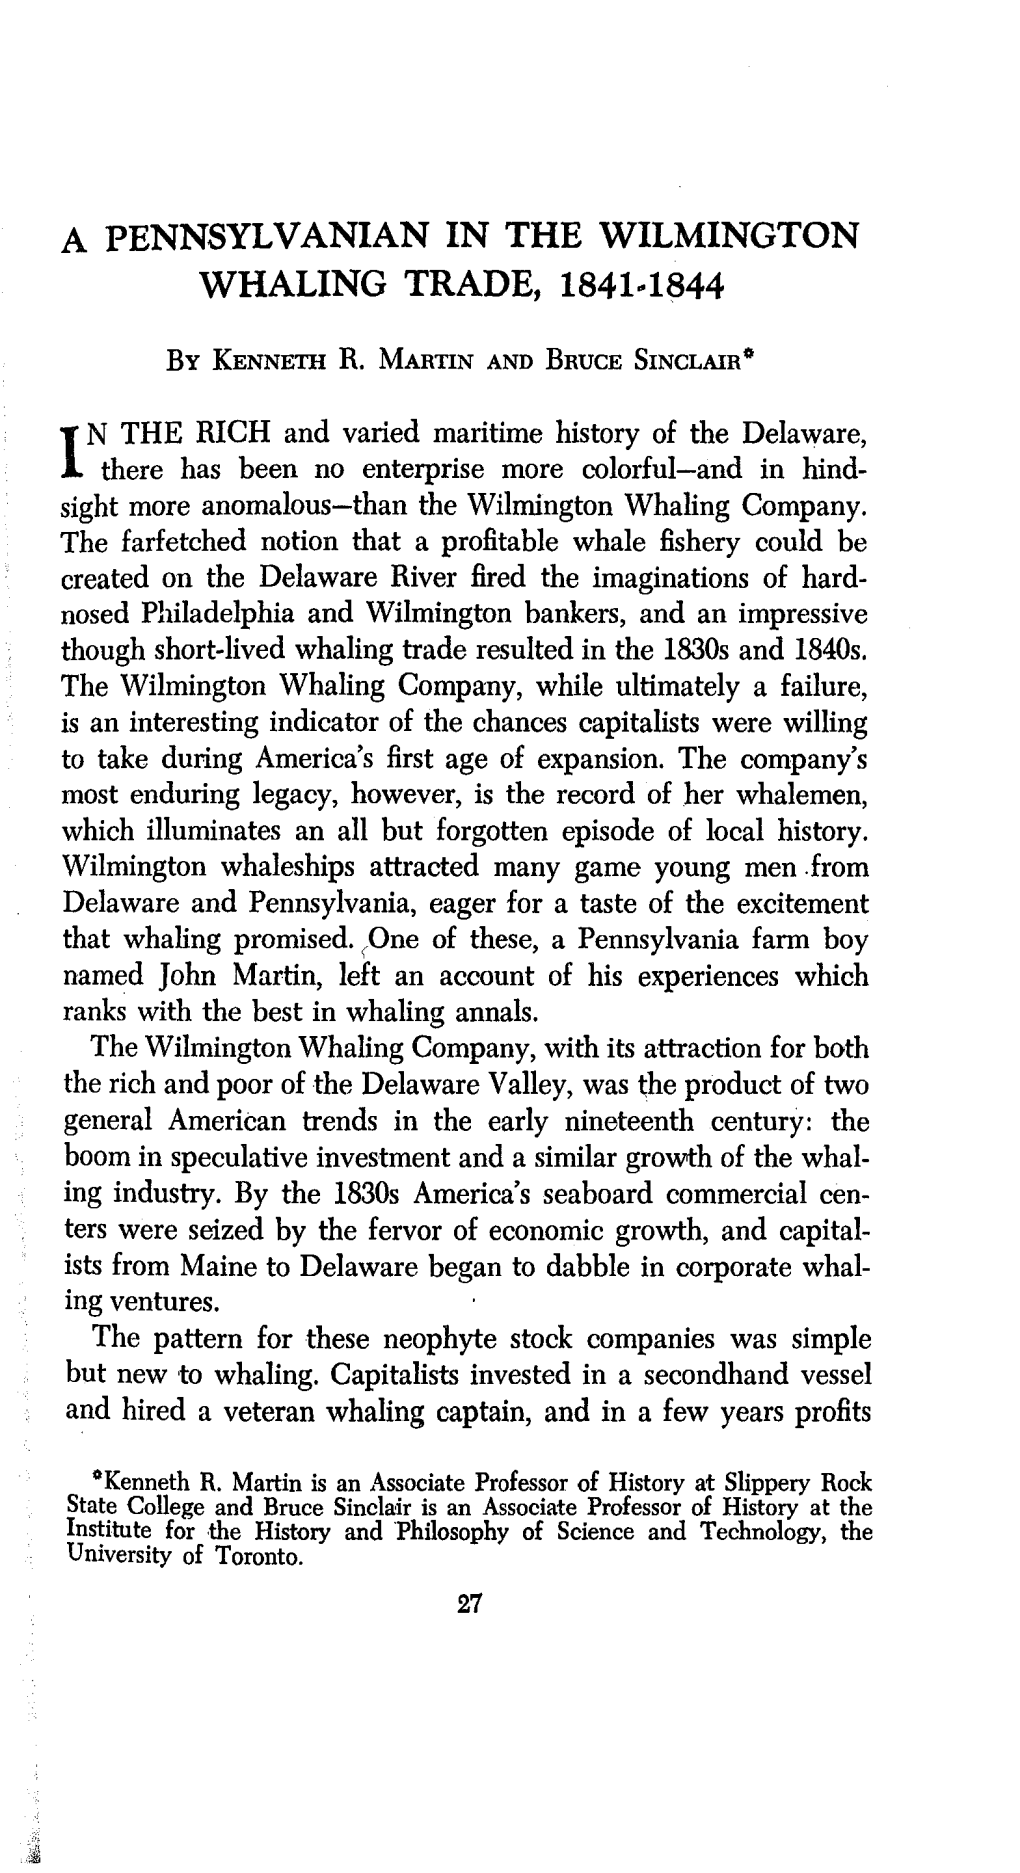 A Pennsylvanian in the Wilmington Whaling Trade, 1841-1844